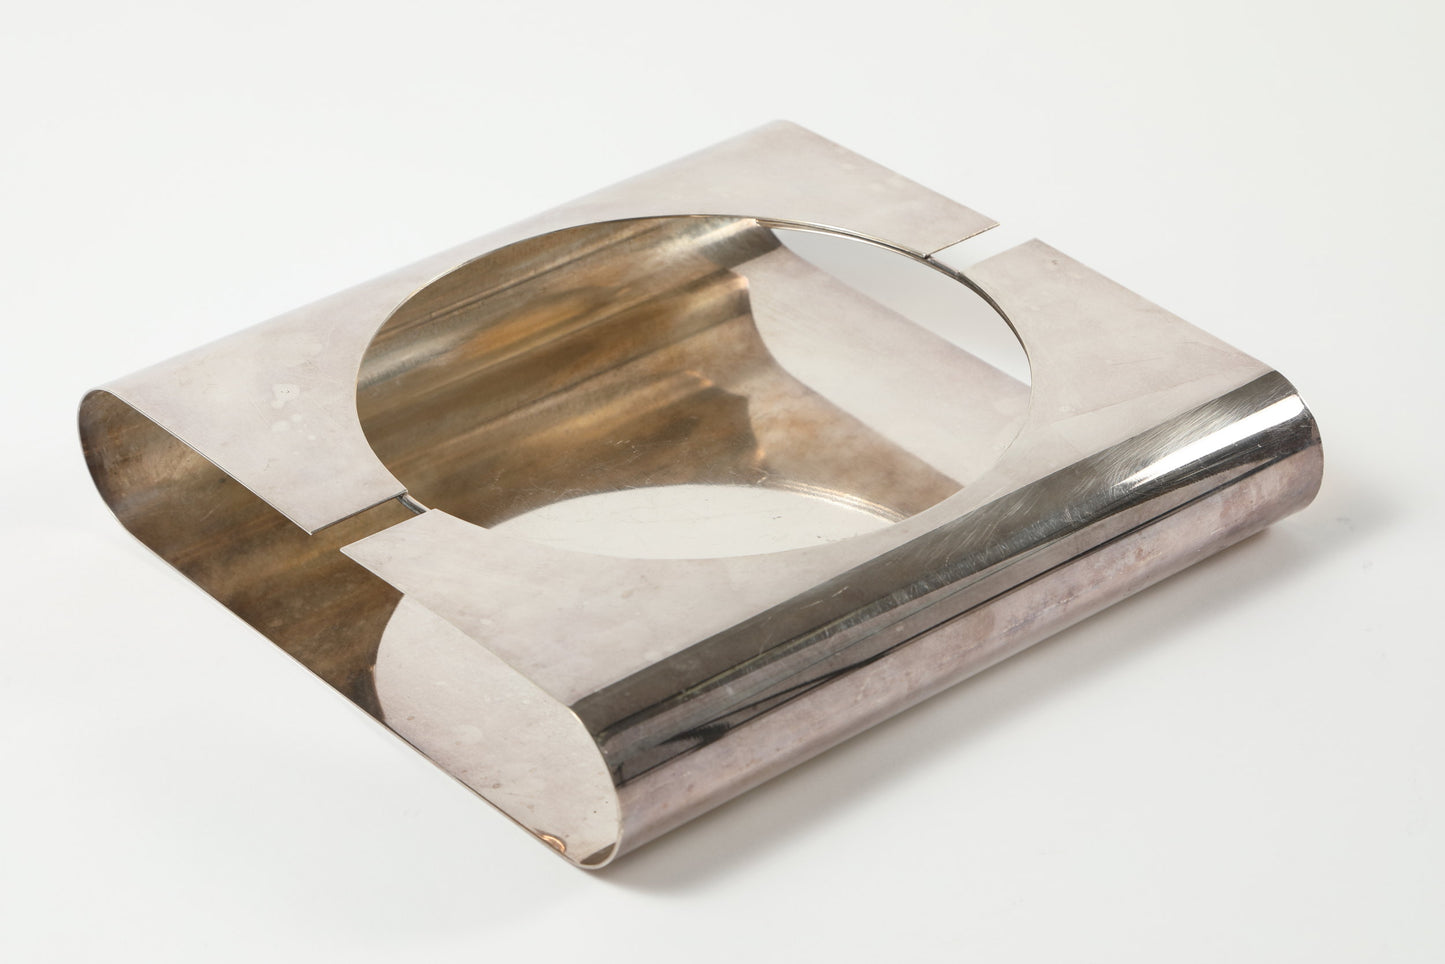 Lino Sabattini silver plated pocket tray from the 70s